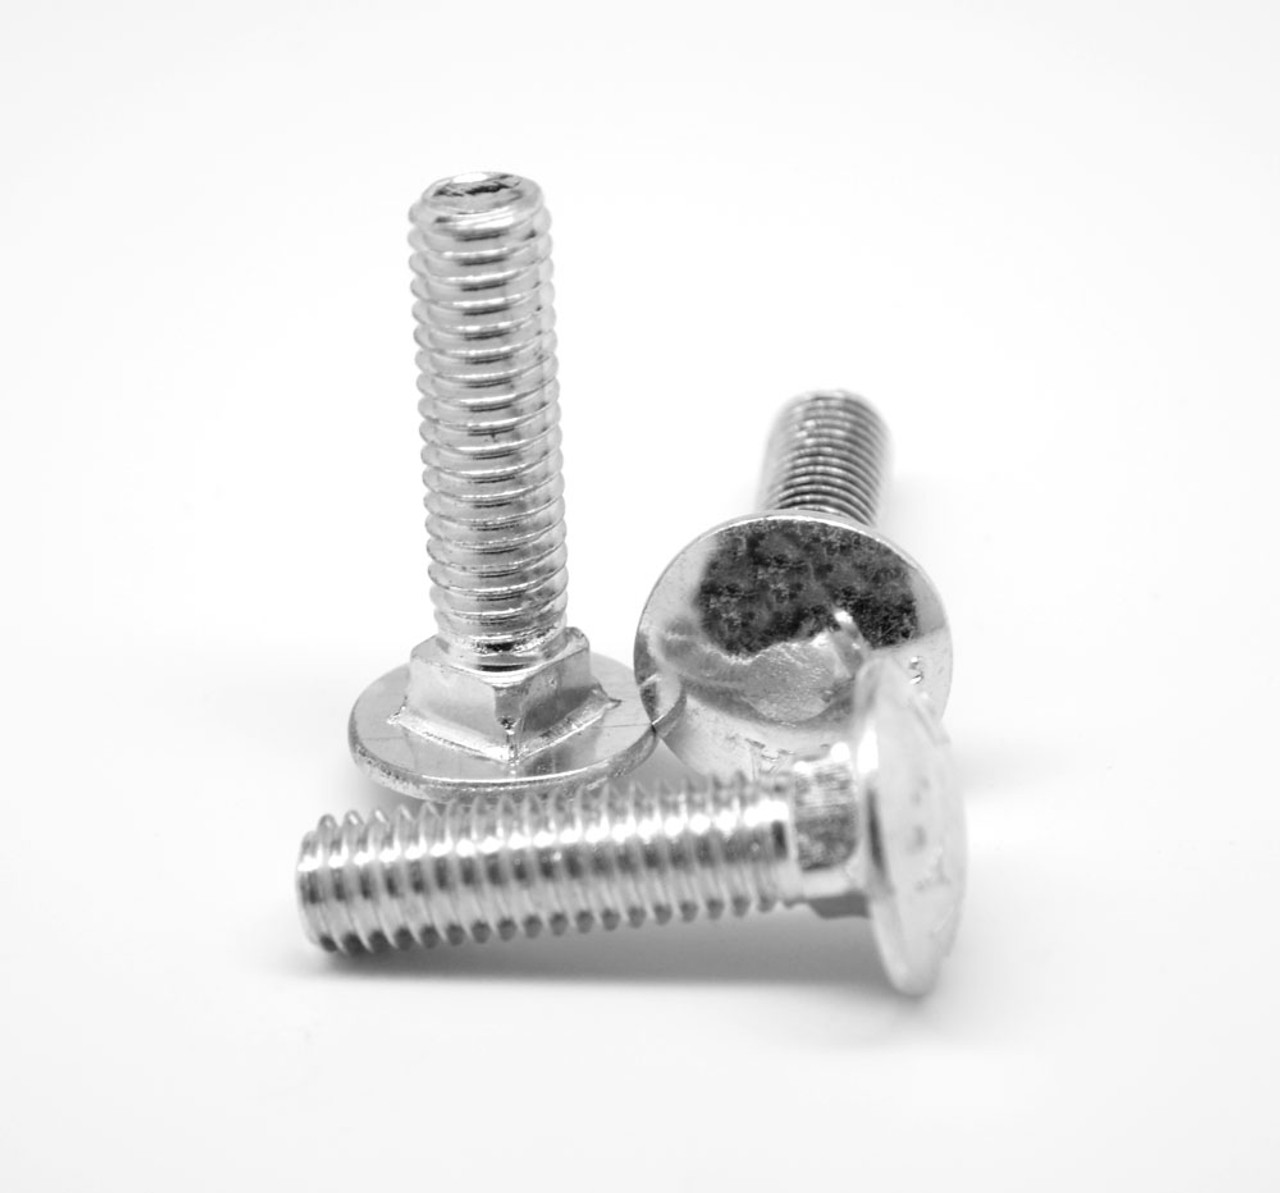 M6 x 1.00 x 60 MM (FT) Coarse Thread DIN 603 Class 4.6 Carriage Bolt Low Carbon Steel Zinc Plated